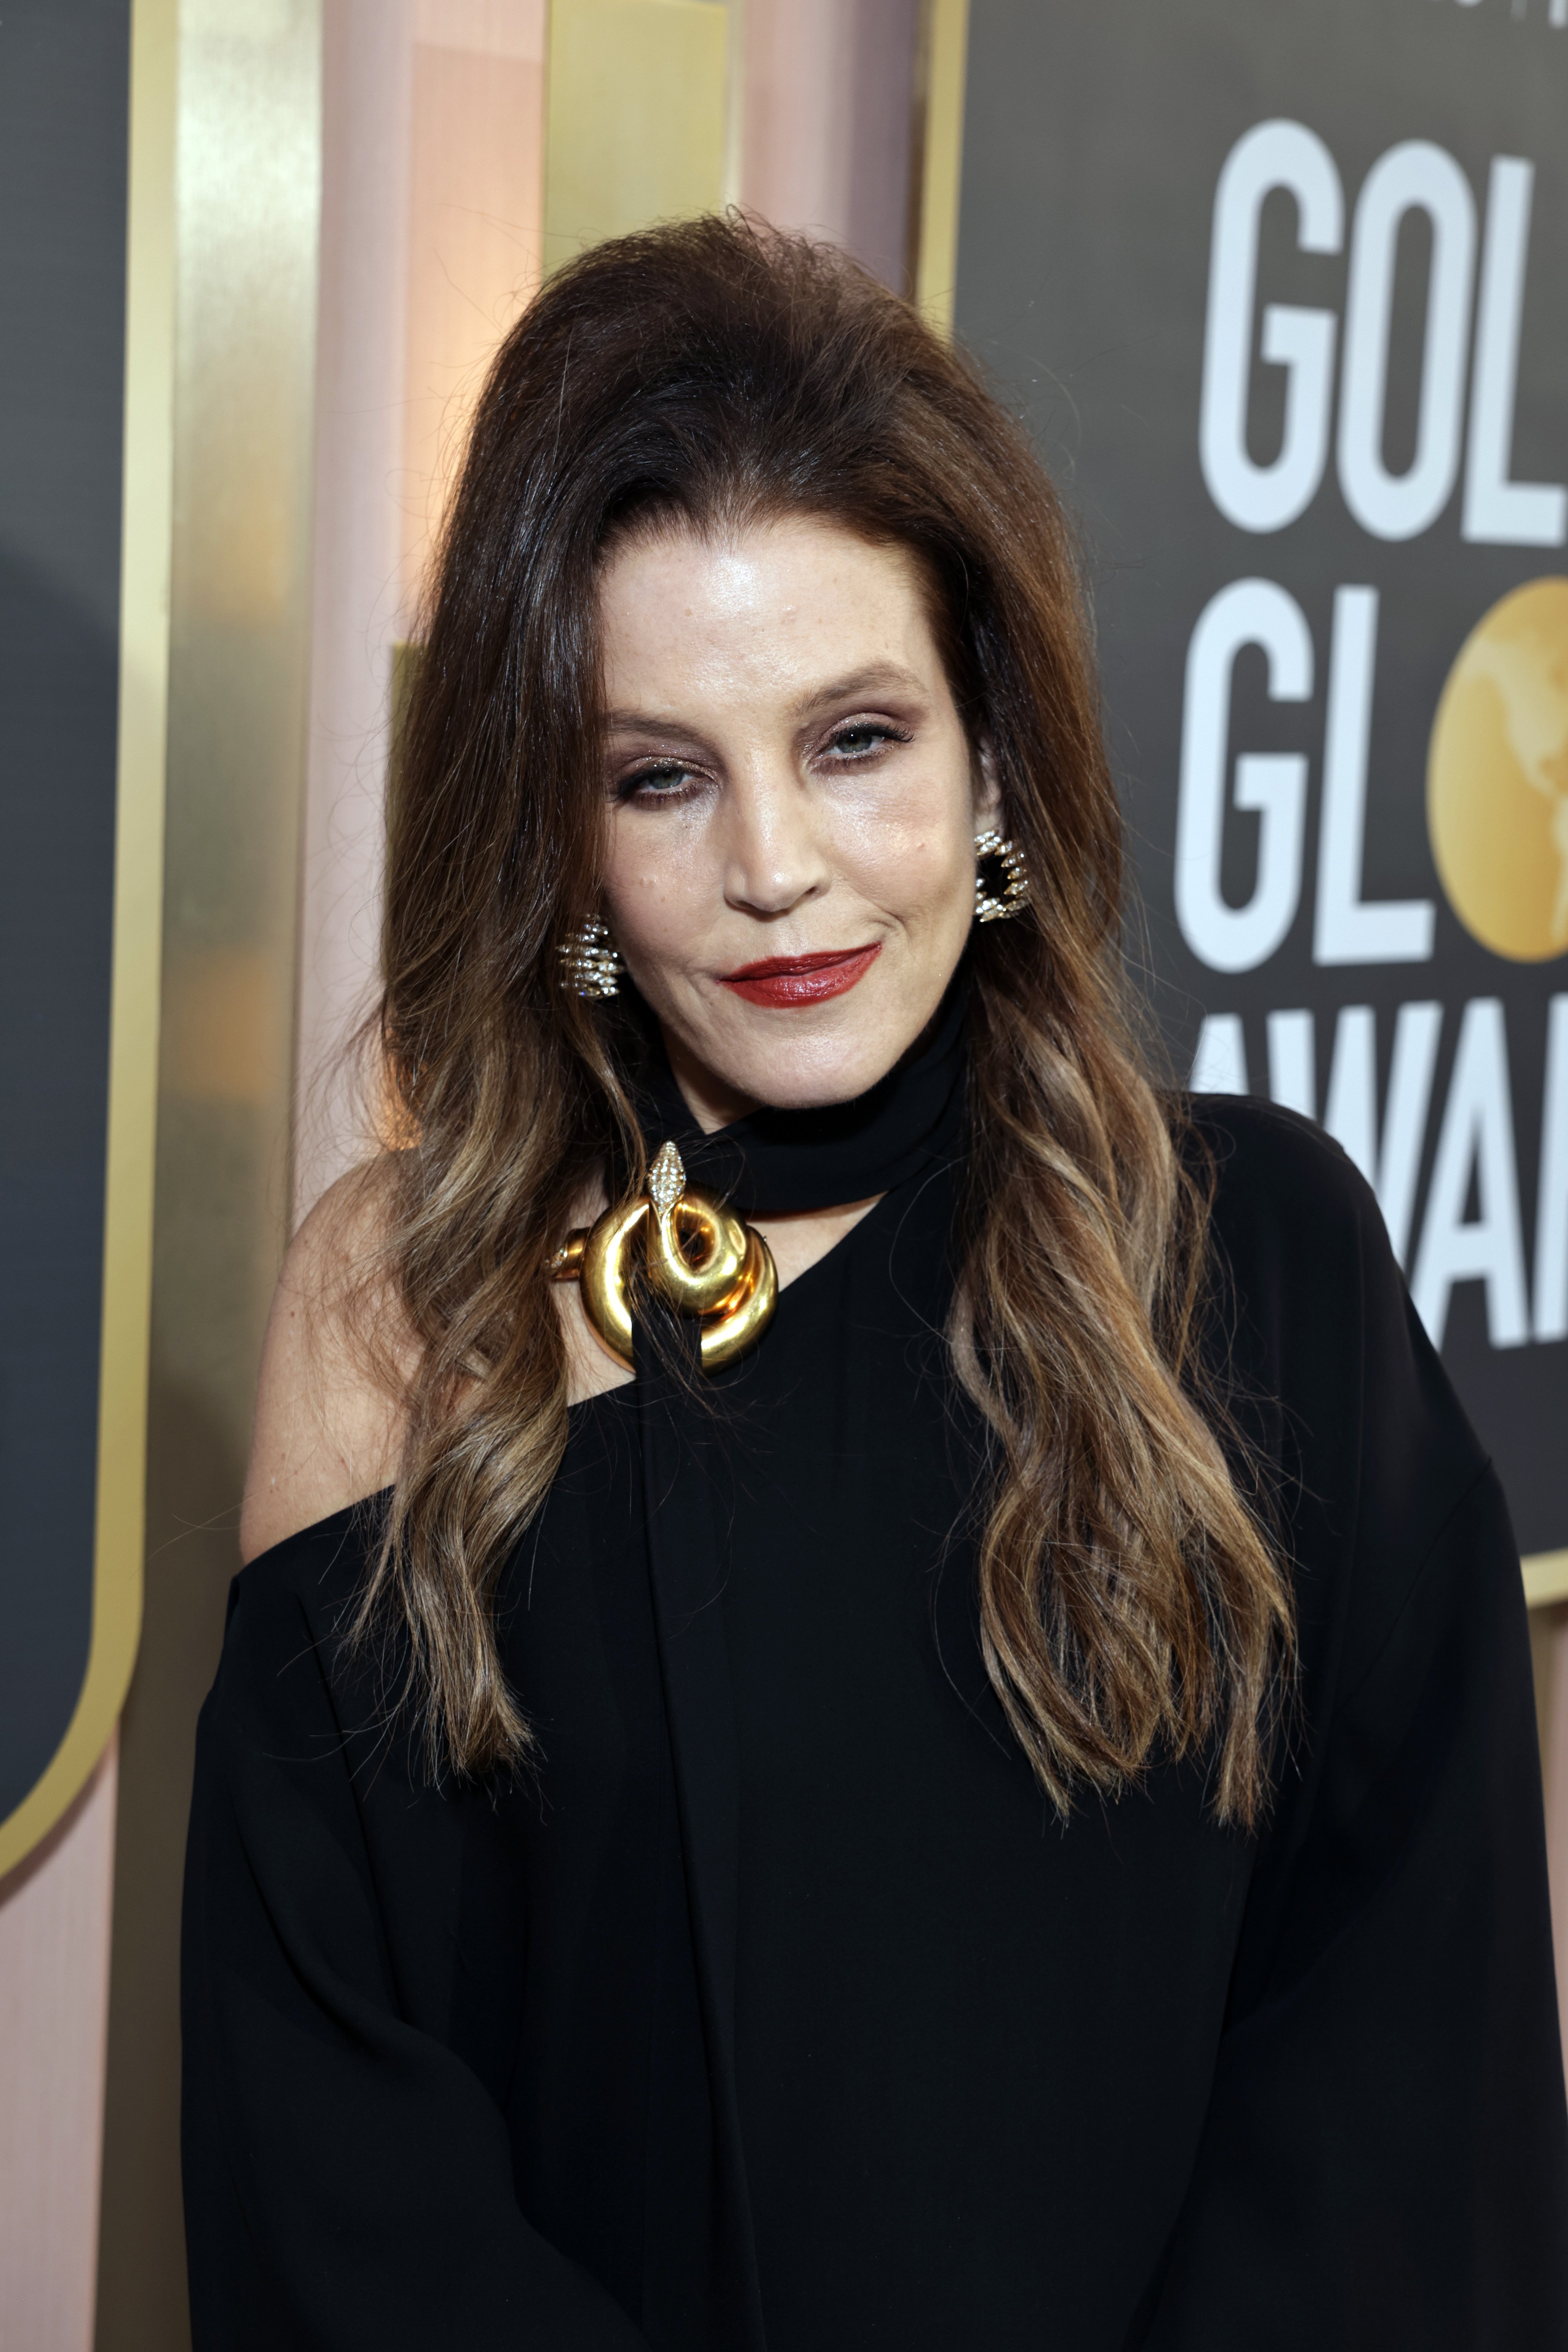 Lisa Marie Presley Is Secretly Buried near Her Father Details